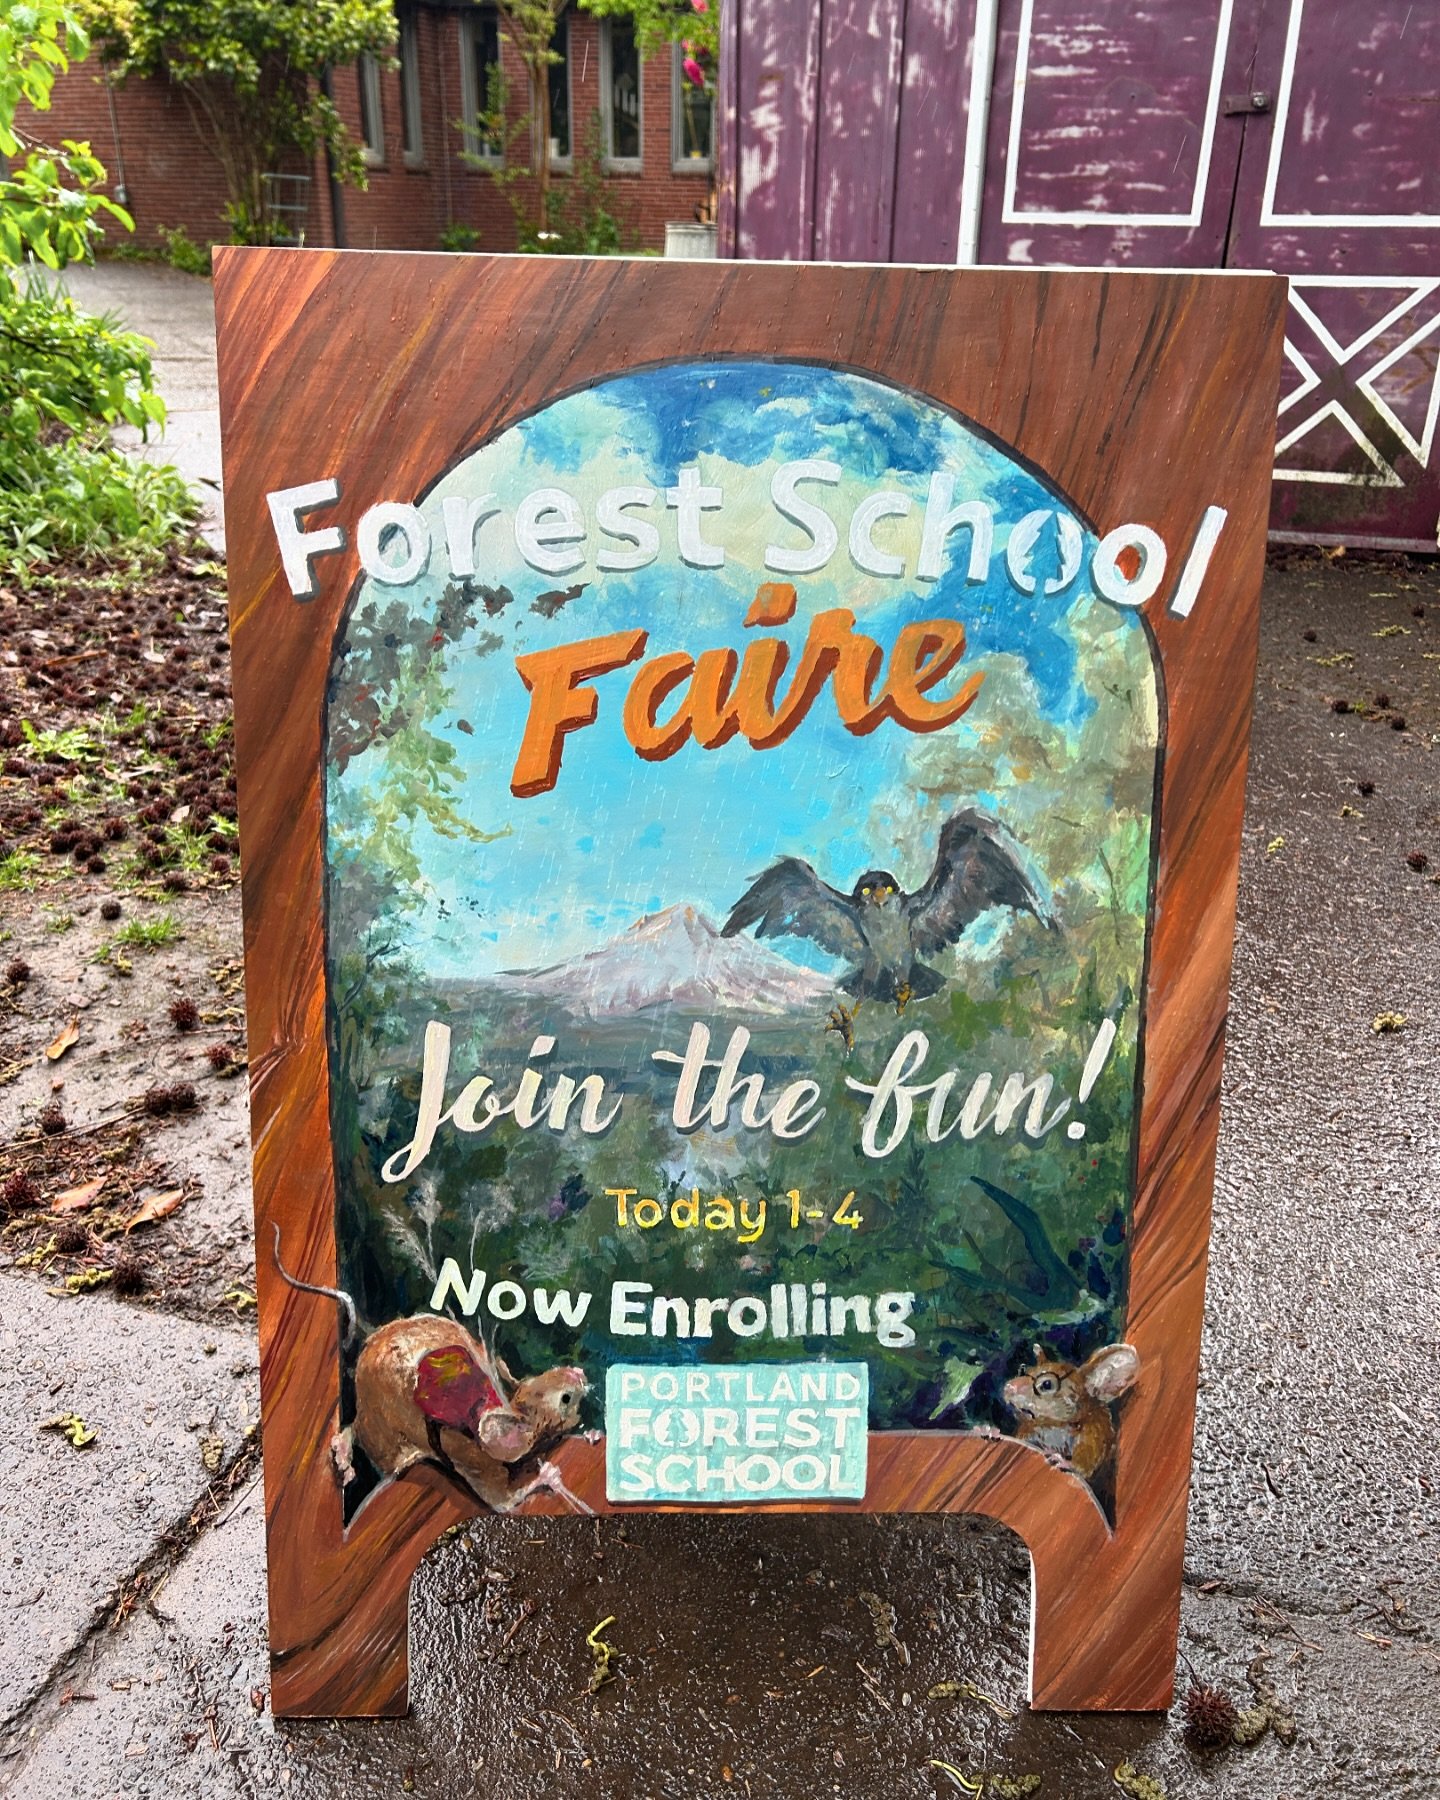 Forest School Faire happening now! Indoor family fun on this rainy May day🌲

A big thank you to the sign artist (and Forest School parent) Toby Linwood @tobylinwood of Tattoo 34 @tattoo34pdx 🎨